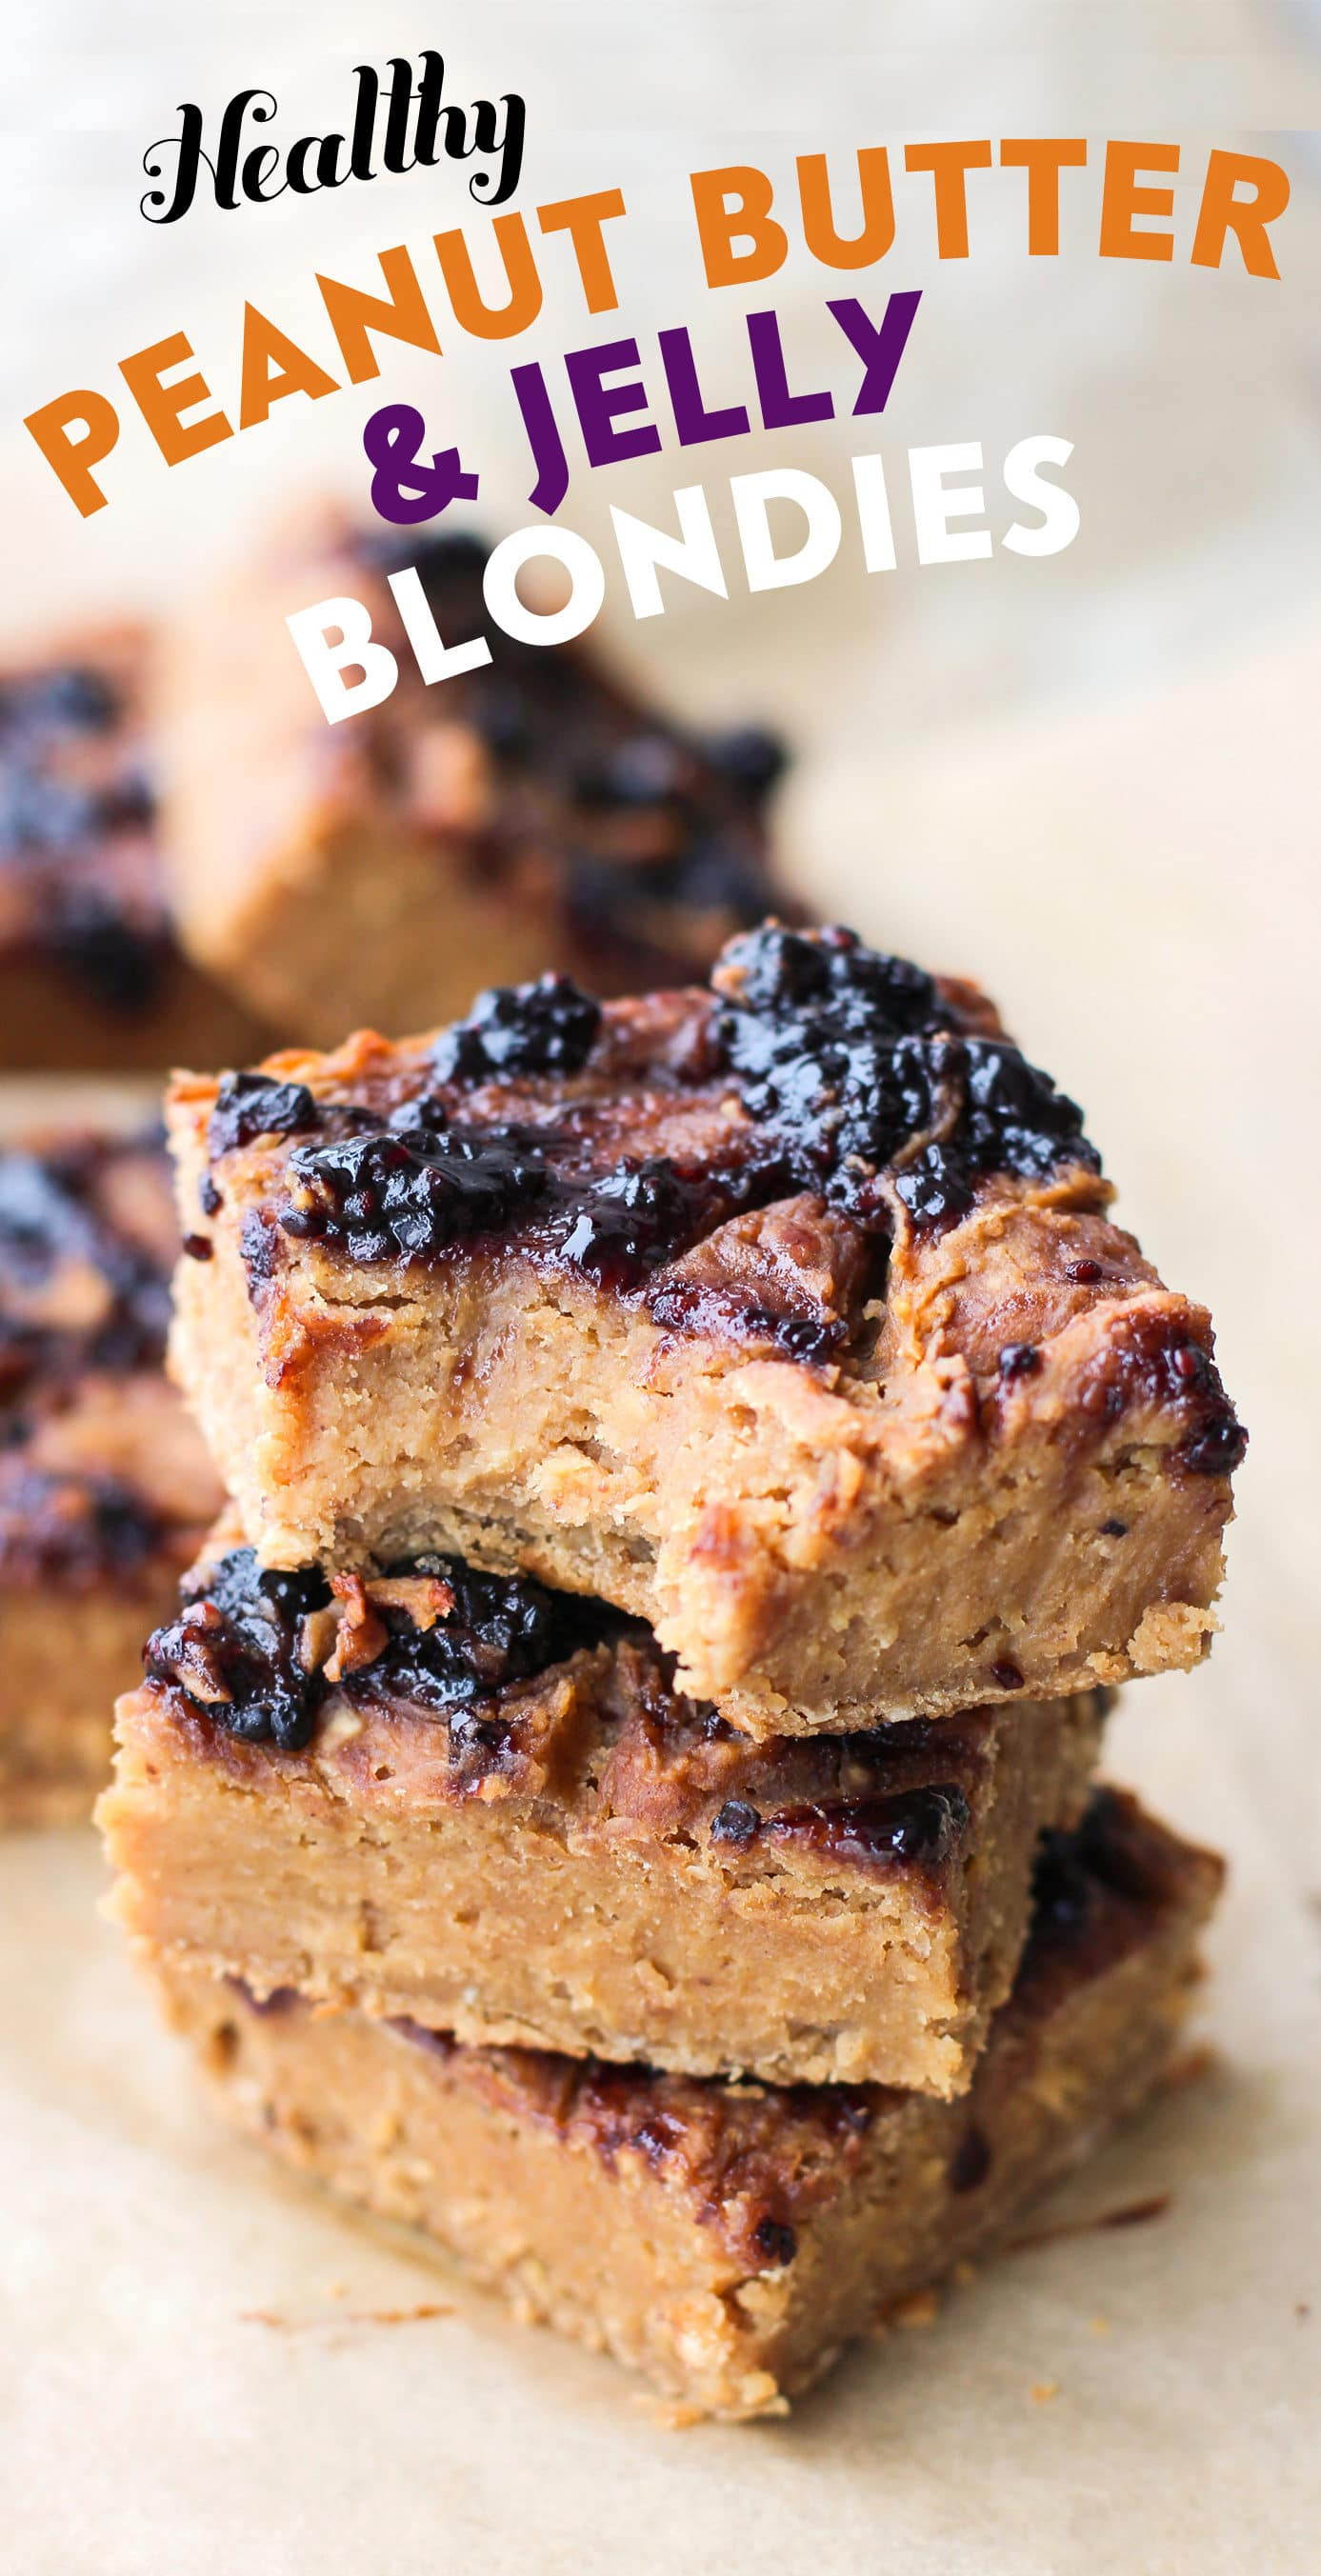 Healthy Peanut Butter Desserts
 Healthy Peanut Butter and Jelly Blon s